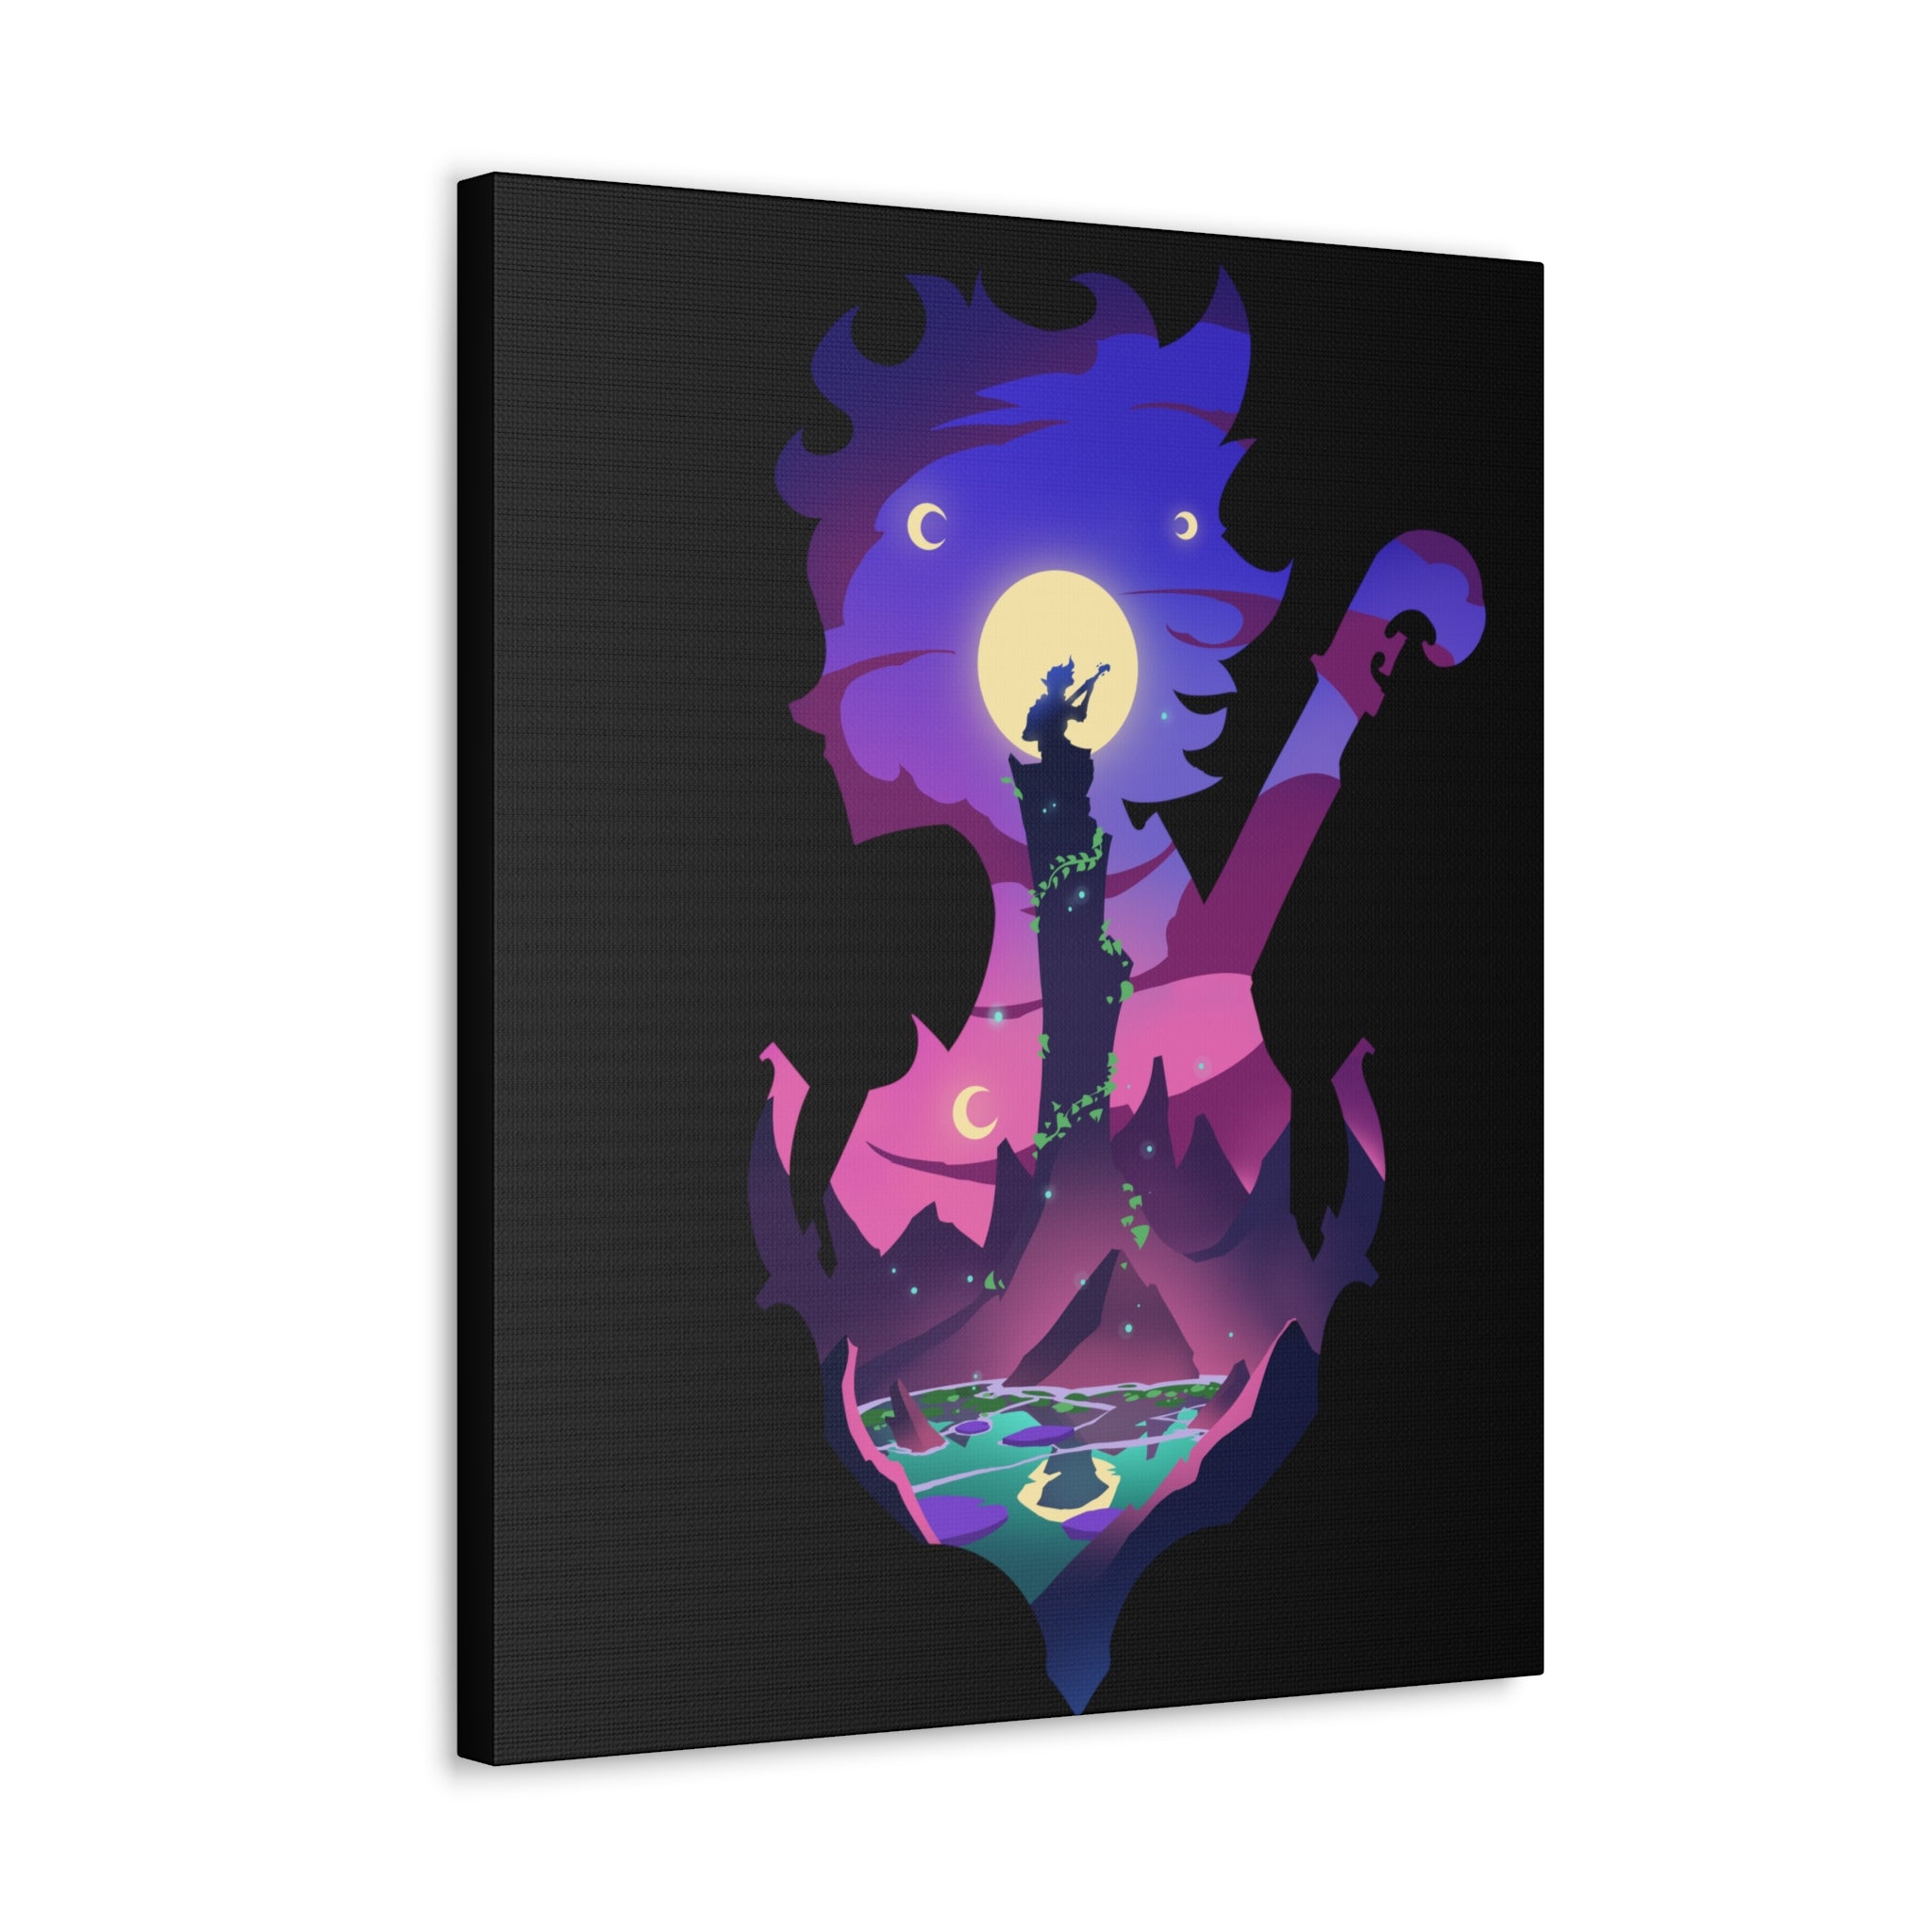 BARD CLASS SILHOUETTE CANVAS GALLERY WRAPS